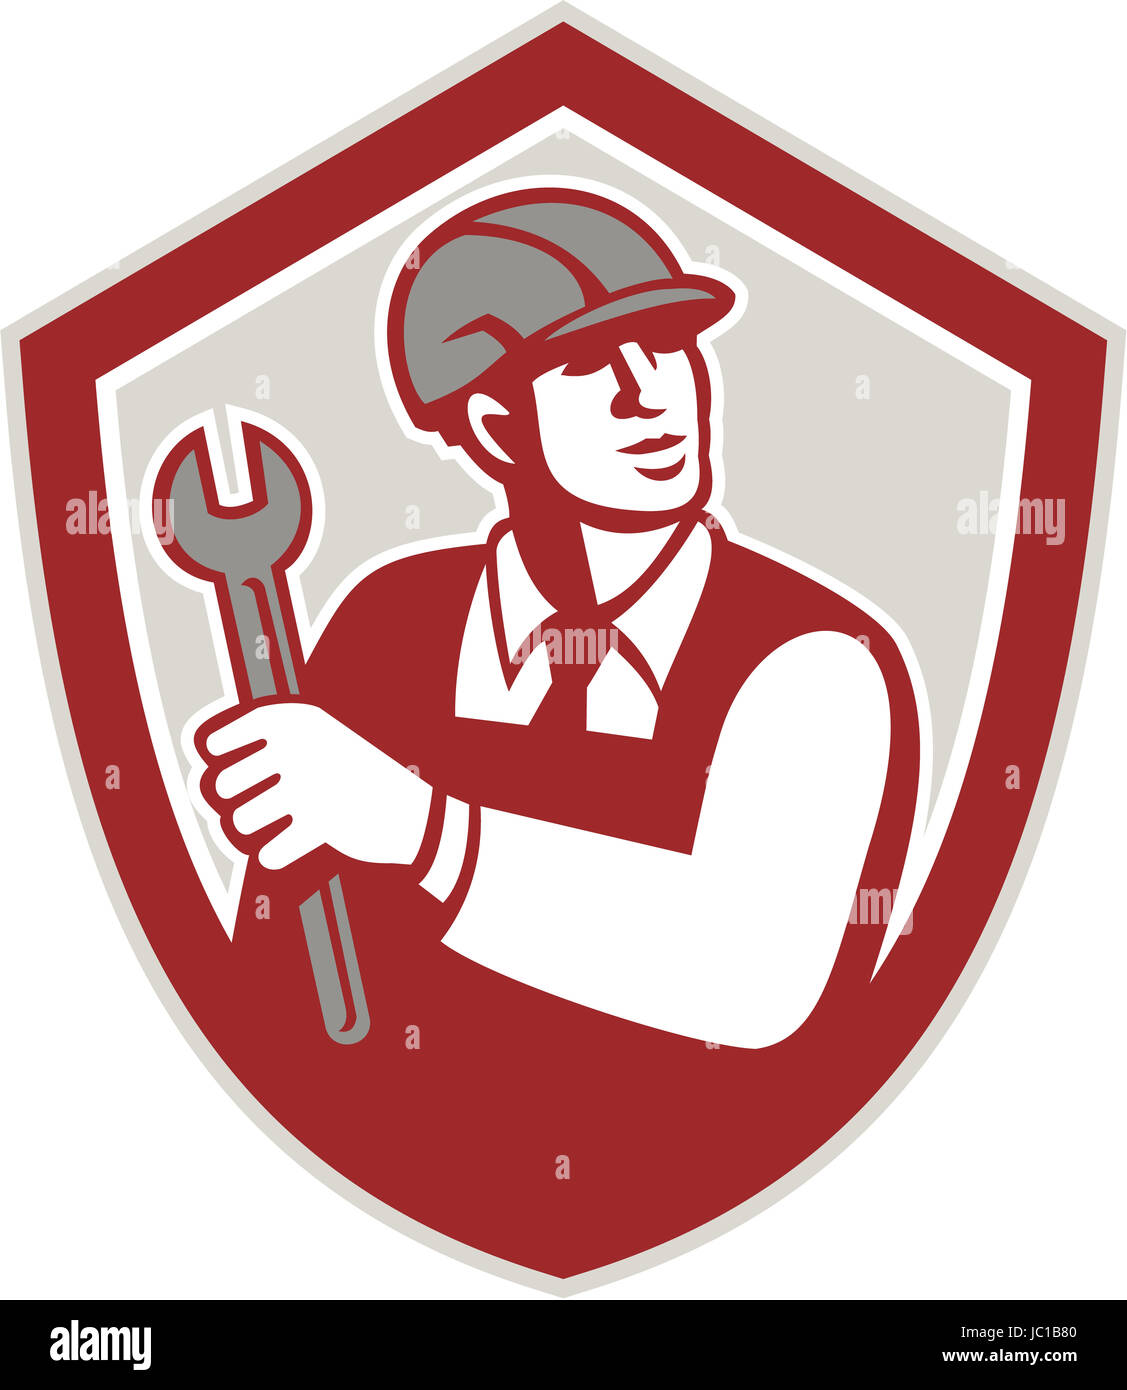 Illustration of a mechanic wearing hardhat holding spanner wrench lookiong up facing front set inside crest shield on isolated background done in retro style. Stock Photo